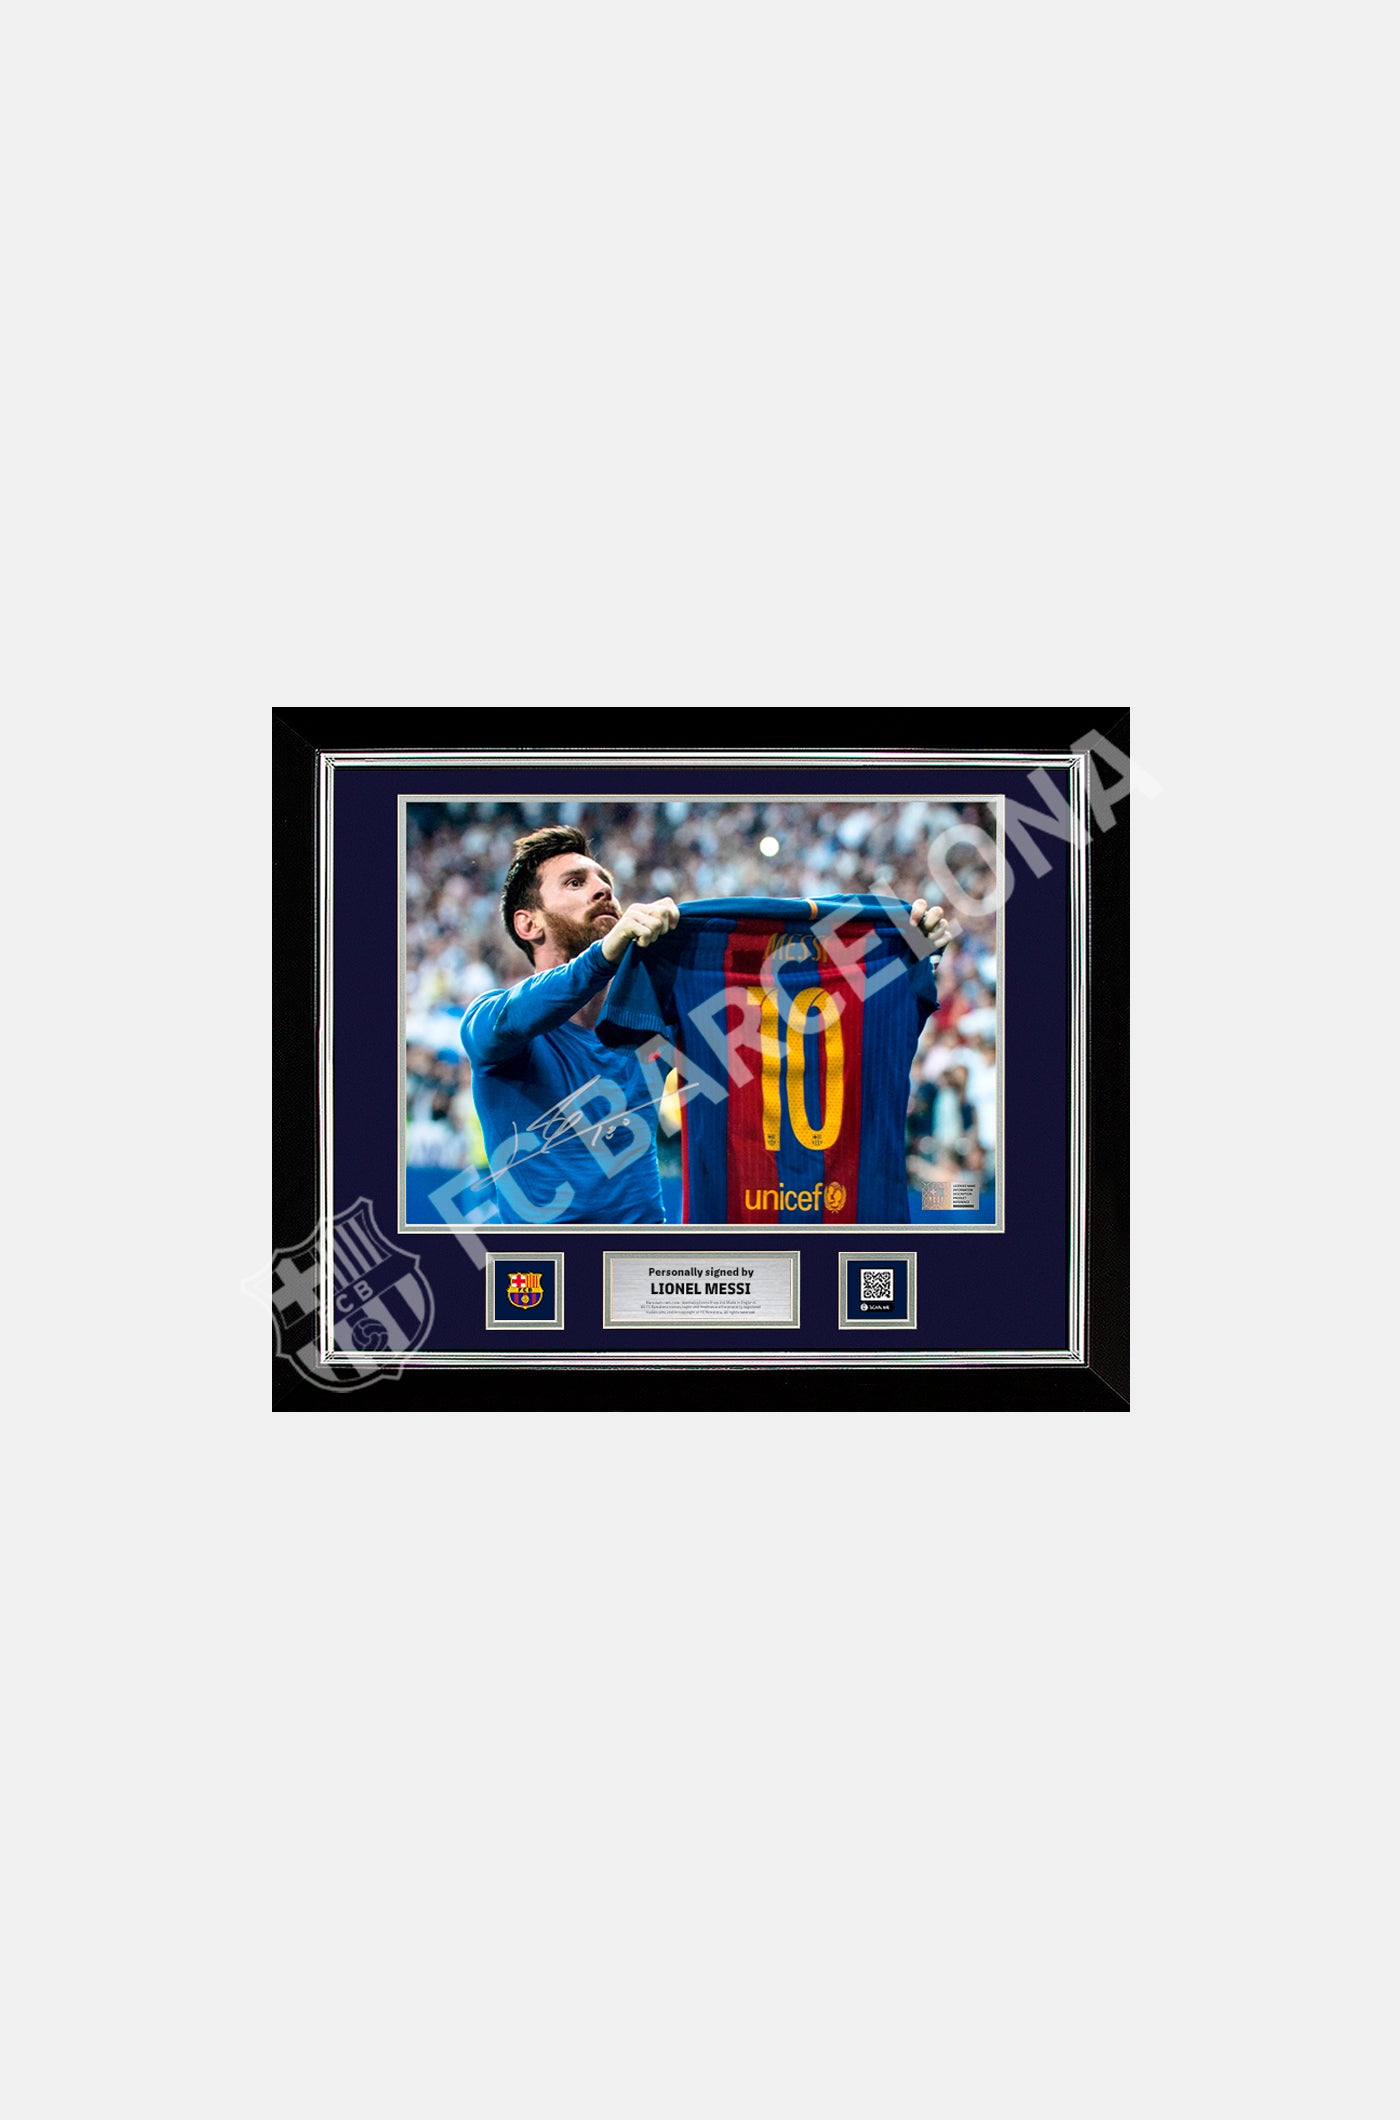 Lionel Messi Official FC Barcelona Signed and Framed Photo: Iconic Clasico Celebration